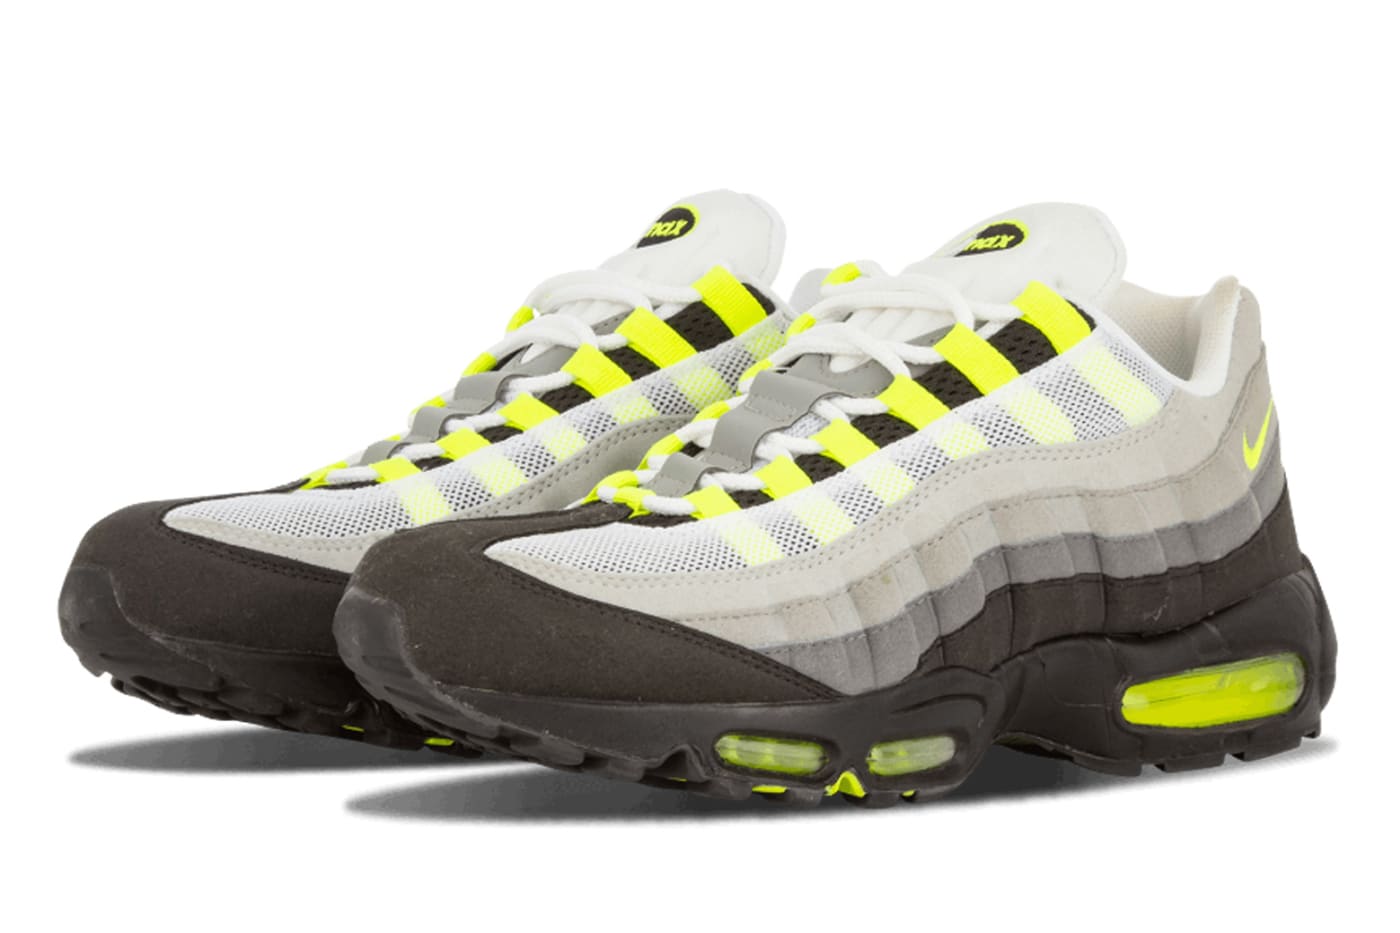 Stå op i stedet Modstander Tag fat Nike Air Max 95: 20 Things You Didn't Know About the Sneaker | Complex